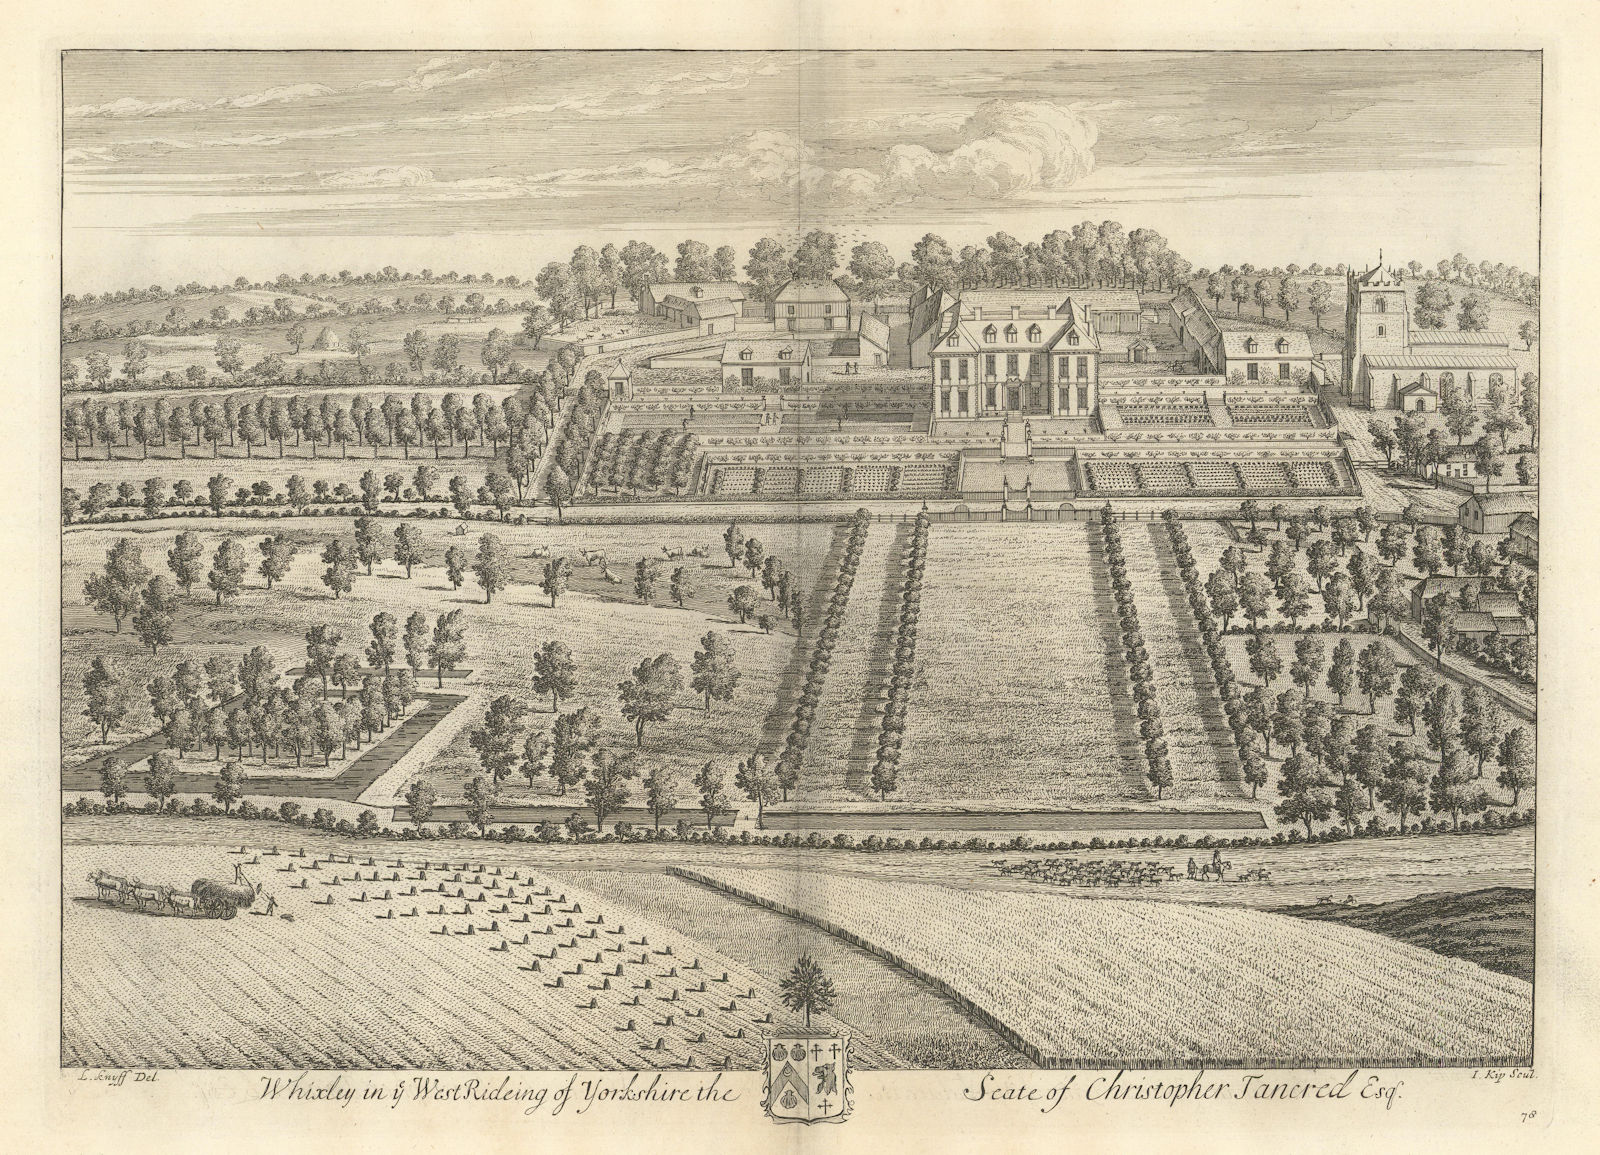 Associate Product Whixley Hall by Kip & Knyff. "Whixley in ye West Rideing of Yorkshire" 1709